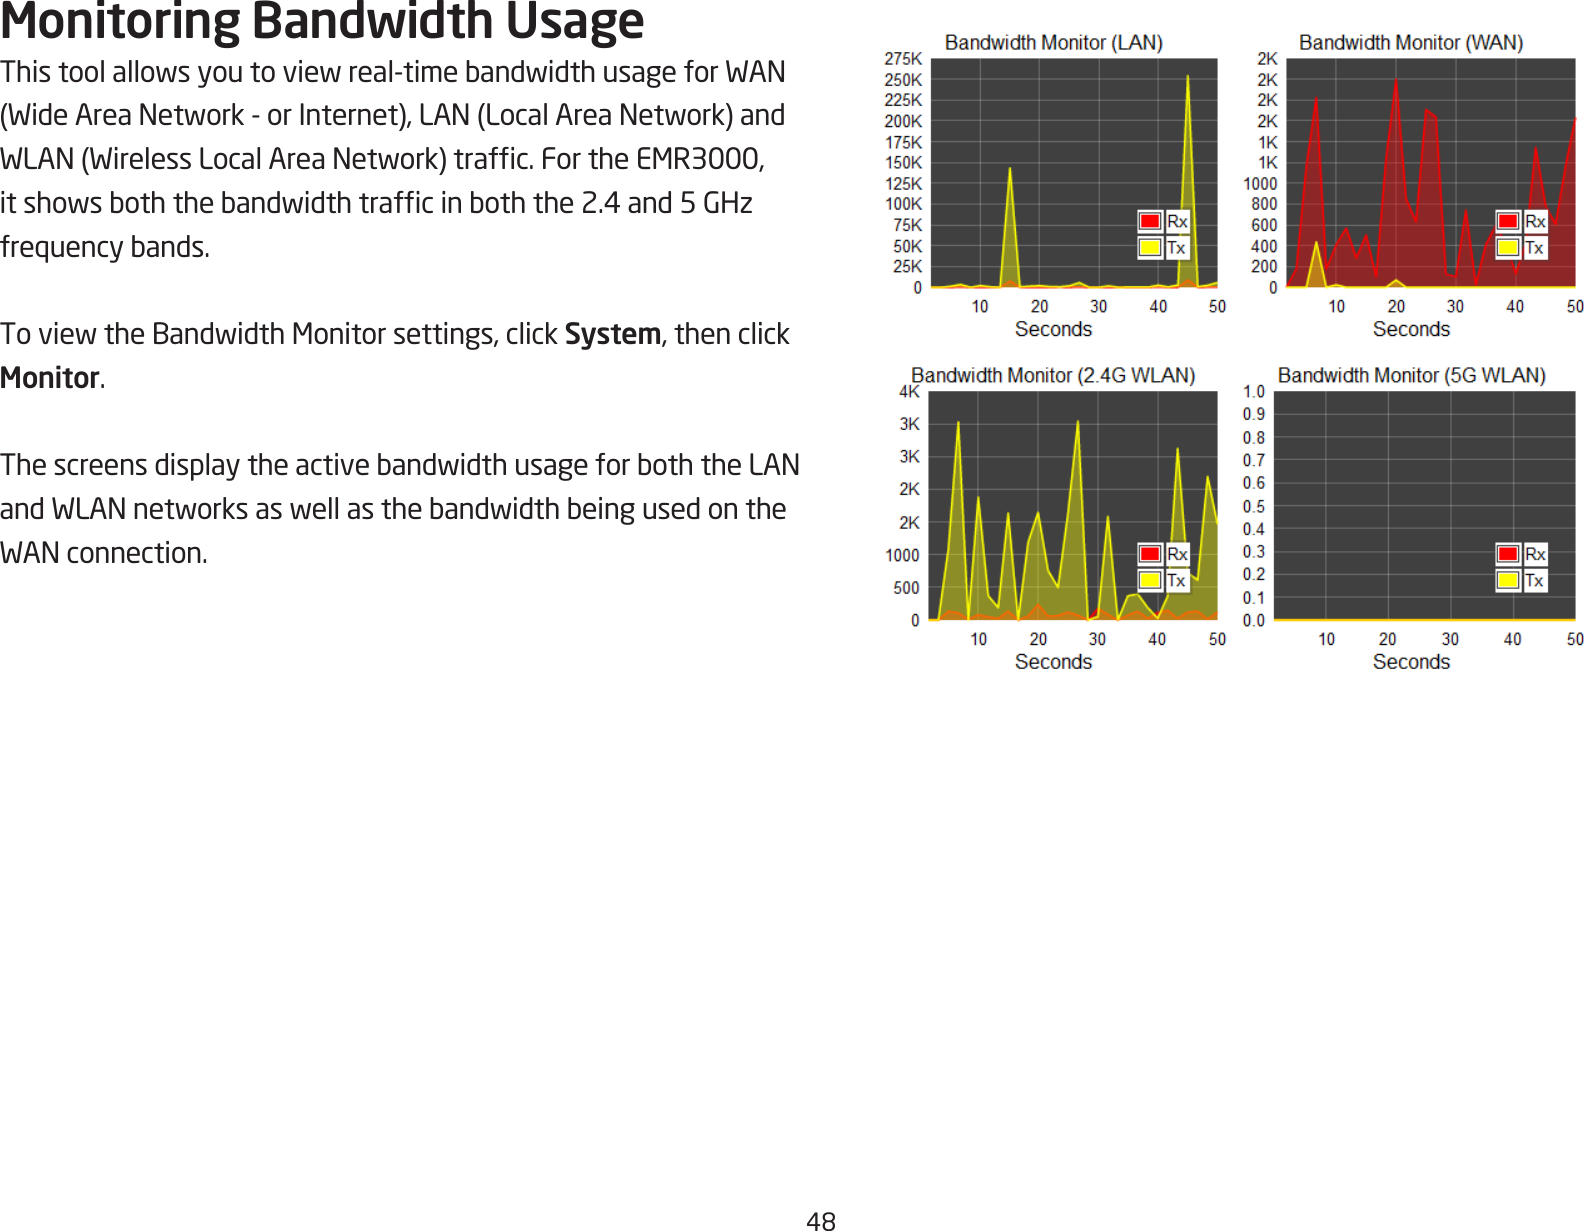 48Monitoring Bandwidth UsageThistoolallowsyoutoviewreal-timebandwidthusageforWAN(WideAreaNetwork-orInternet),LAN(LocalAreaNetwork)andWLAN(WirelessLocalAreaNetwork)trafc.FortheEMR3000,itshowsboththebandwidthtrafcinboththe2.4and5GHzfrequencybands.ToviewtheBandwidthMonitorsettings,clickSystem, then click Monitor.ThescreensdisplaytheactivebandwidthusageforboththeLANandWLANnetworksaswellasthebandwidthbeingusedontheWANconnection.